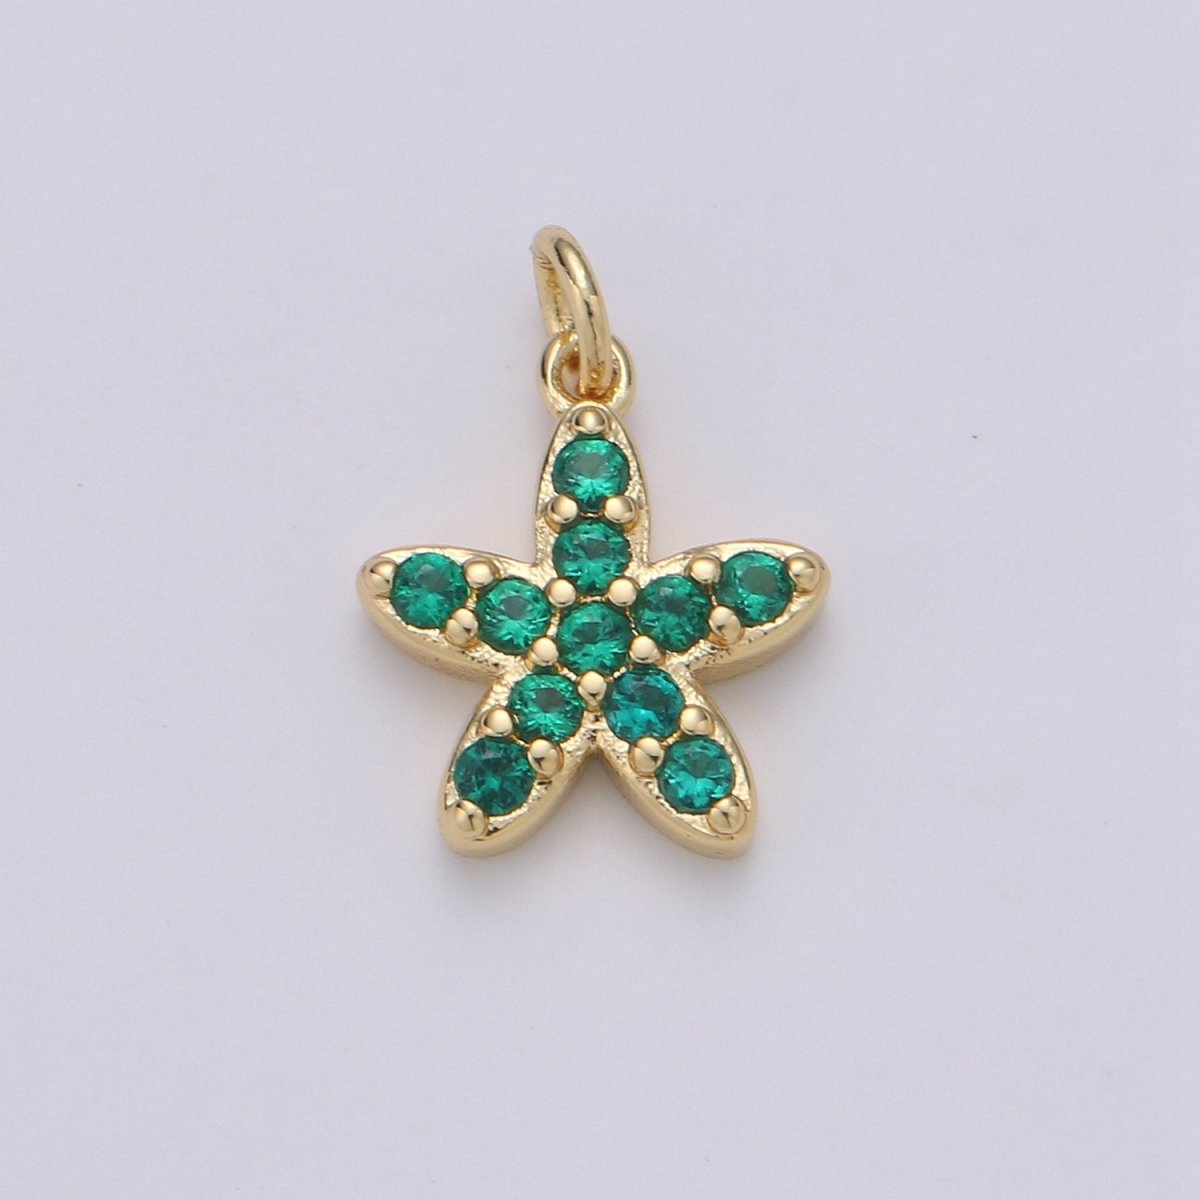 Mini Star Charm Micro Pave Snow Charm, Tiny Gold Flower Charm Colorful Cz Cubic Charm in 14k gold Filled D-652 TO D-657 - DLUXCA